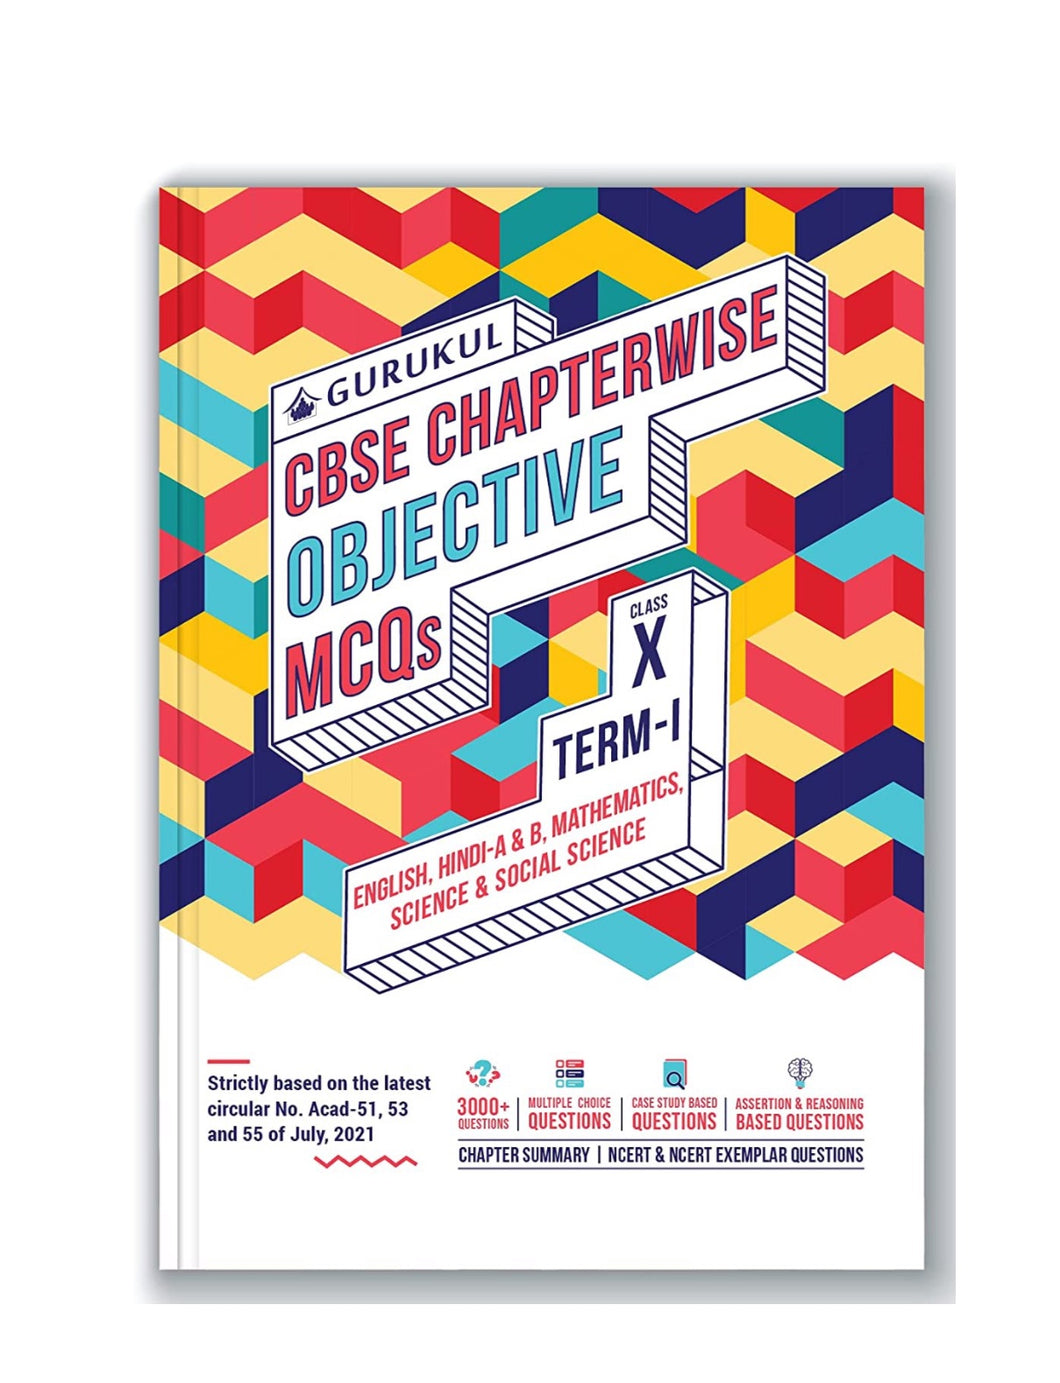 Chapterwise Objective MCQs Book for CBSE Class 10 Term I Exam : 3000+ Questions (Case Study, Multiple Choice) - English, Hindi, Math, Science, Social